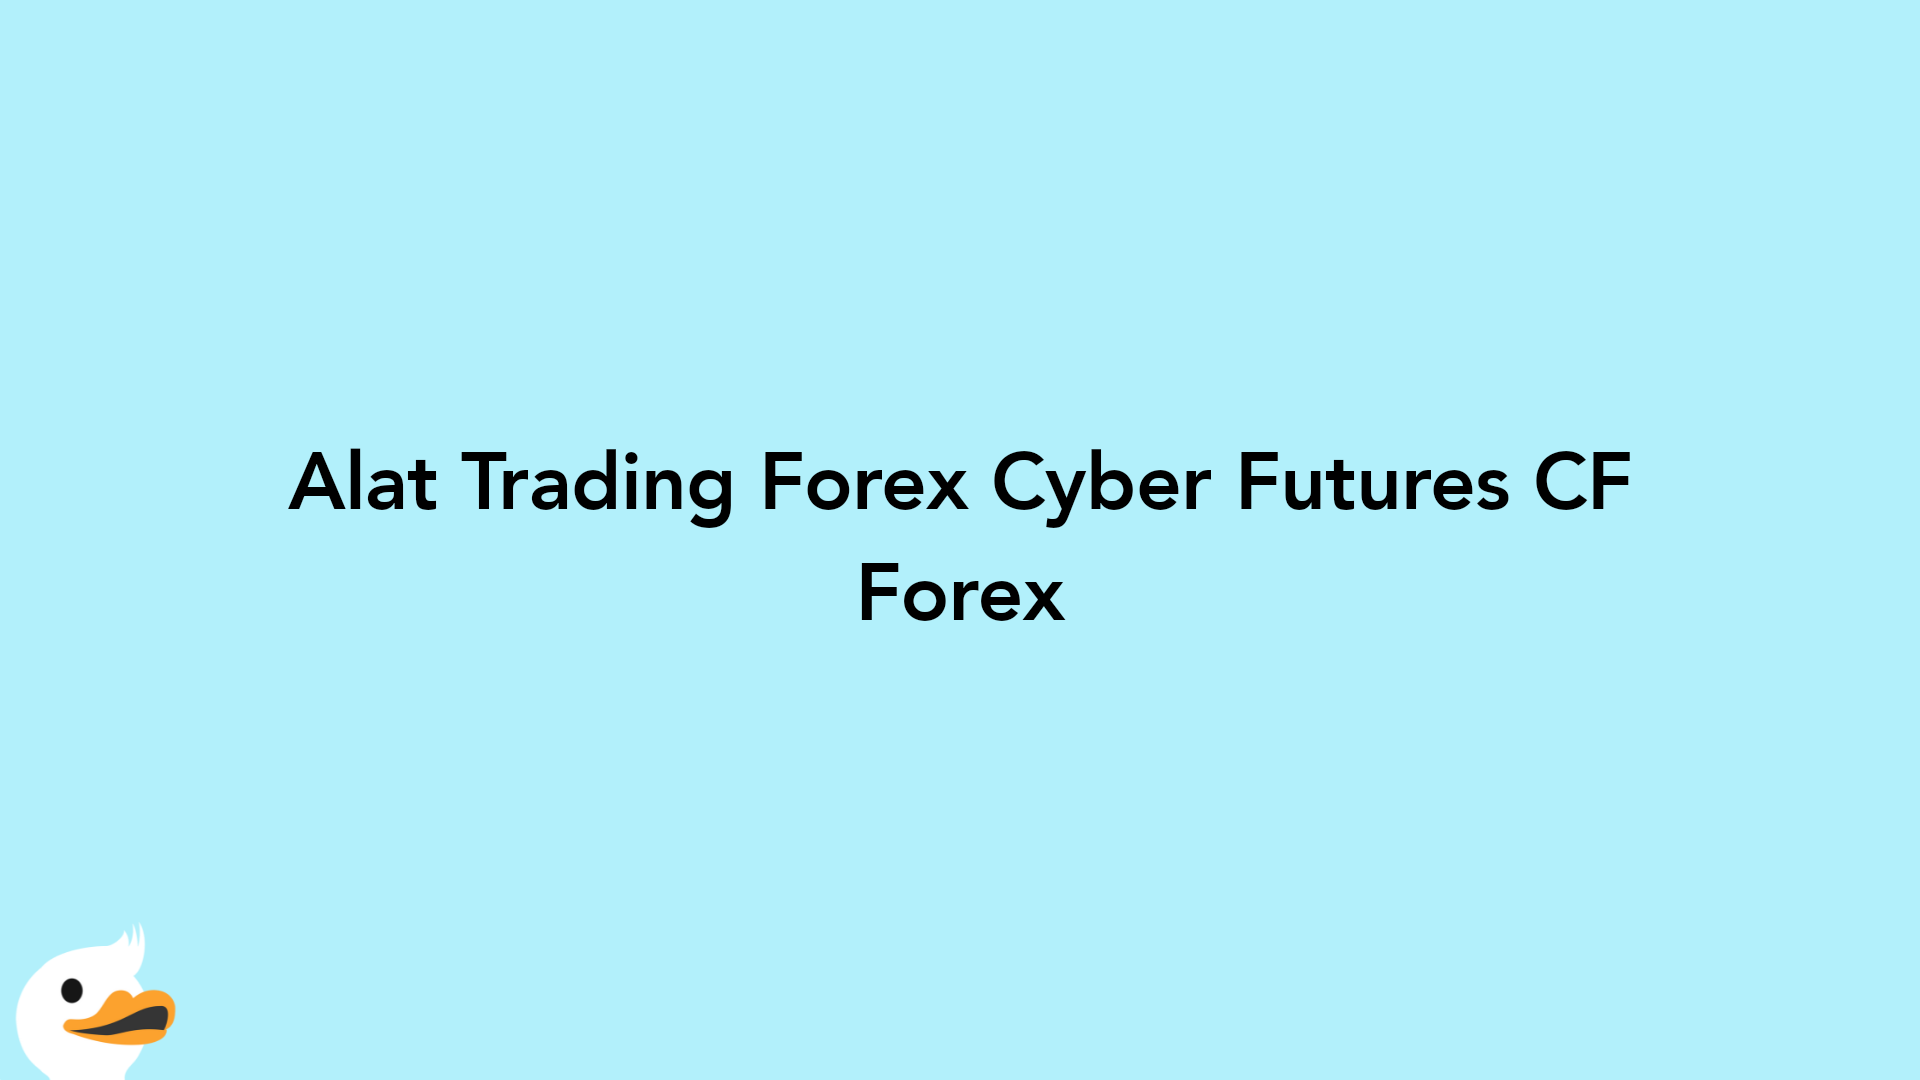 Alat Trading Forex Cyber Futures CF Forex